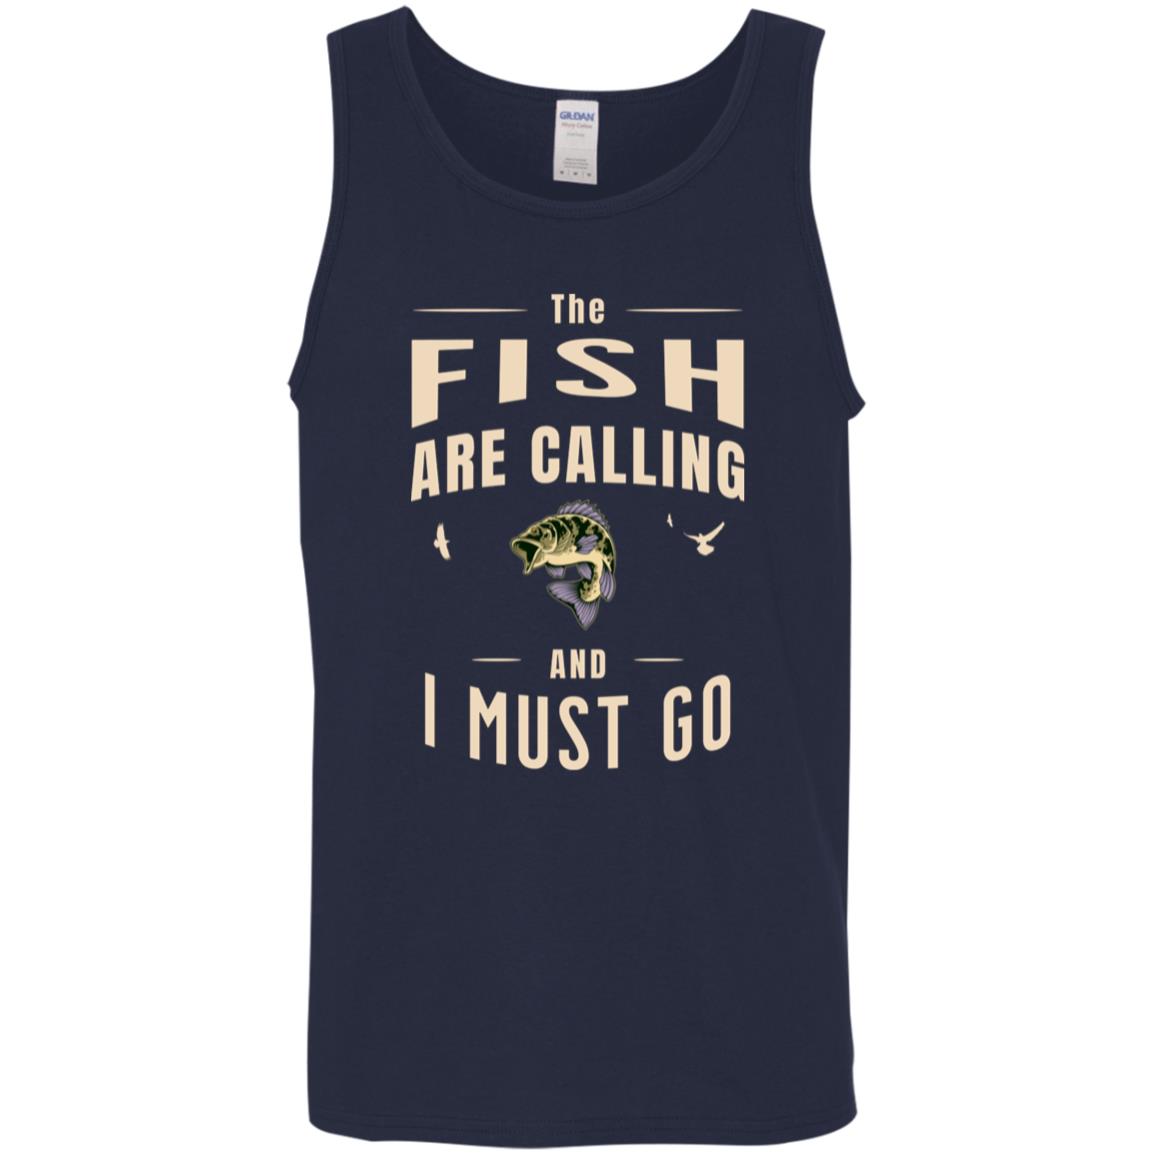 The fish are calling and I must go tank top k navy